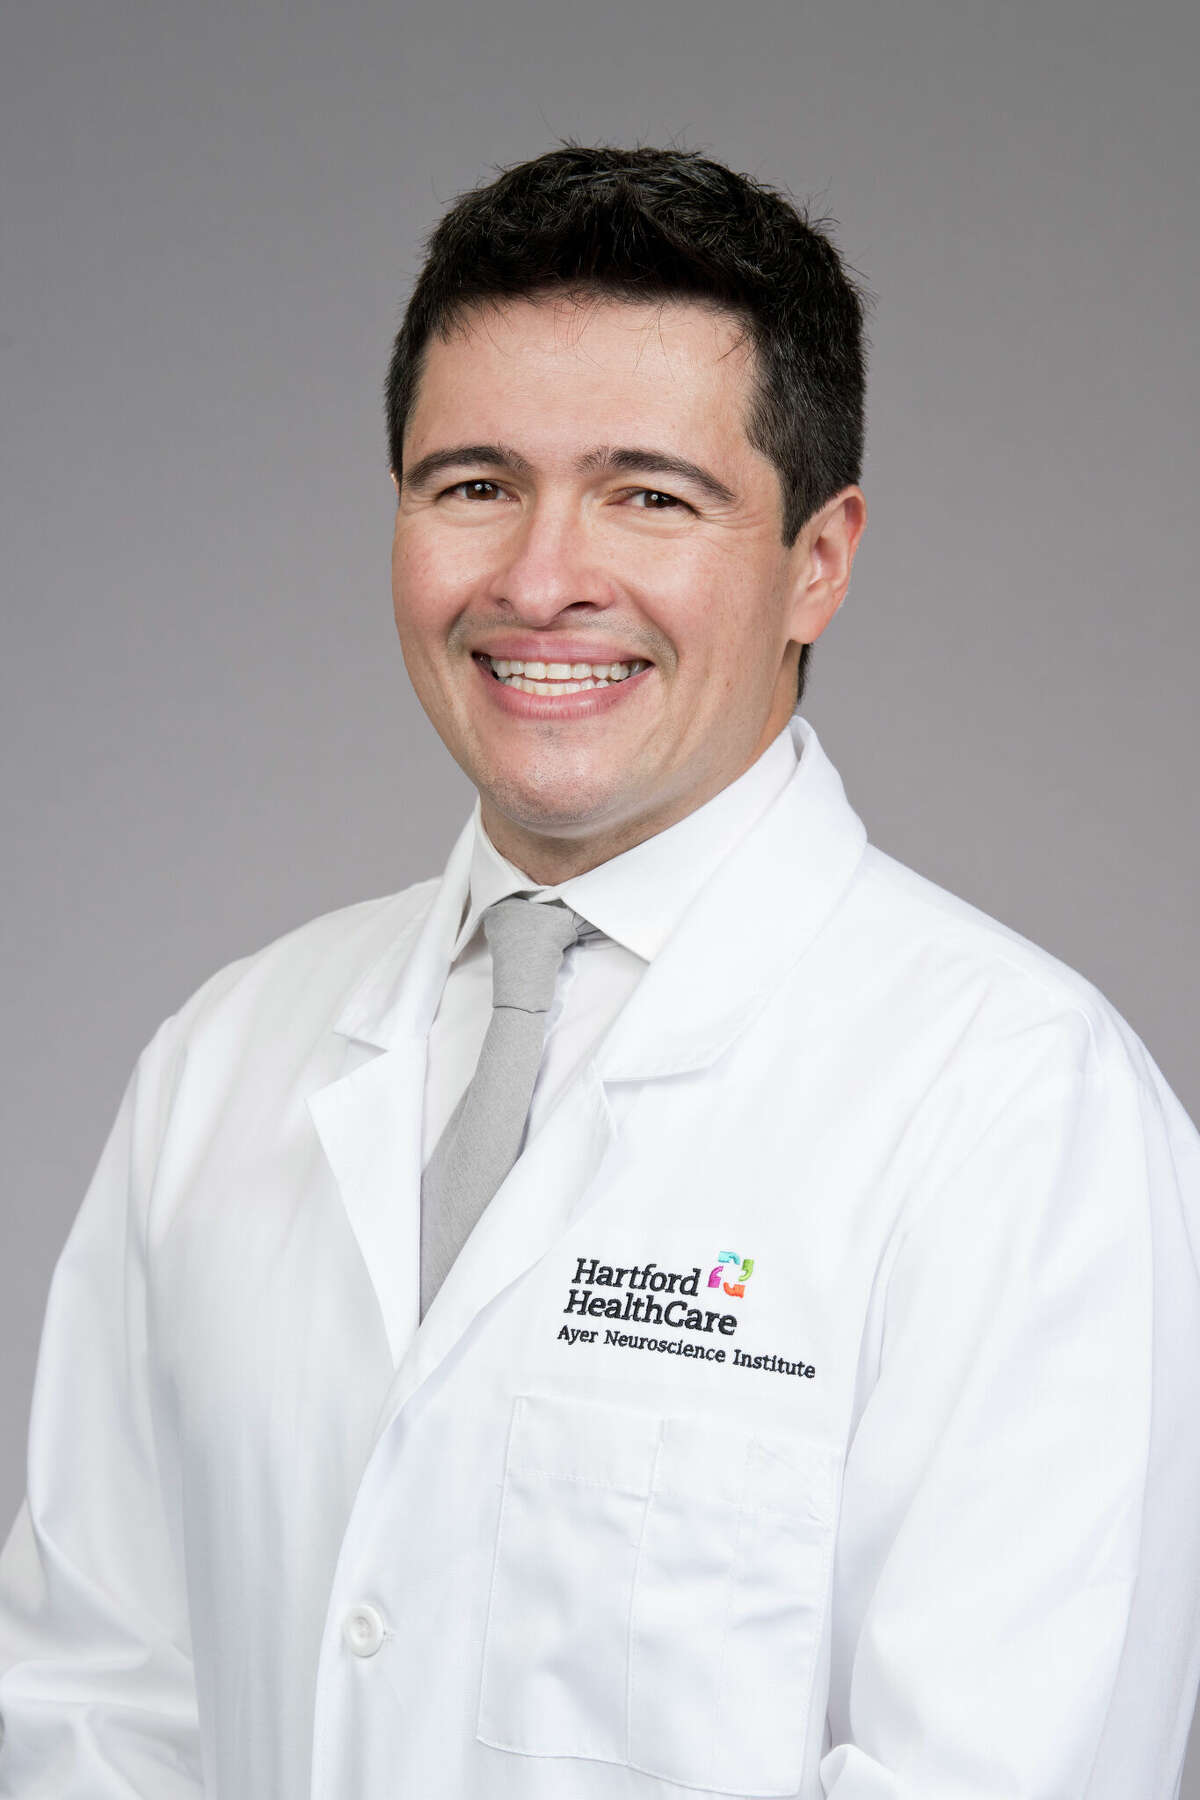 Dr. Daniel Cavalcanti is a neurosurgeon at St. Vincent’s Medical Center’s Ayer Neuroscience Institute.